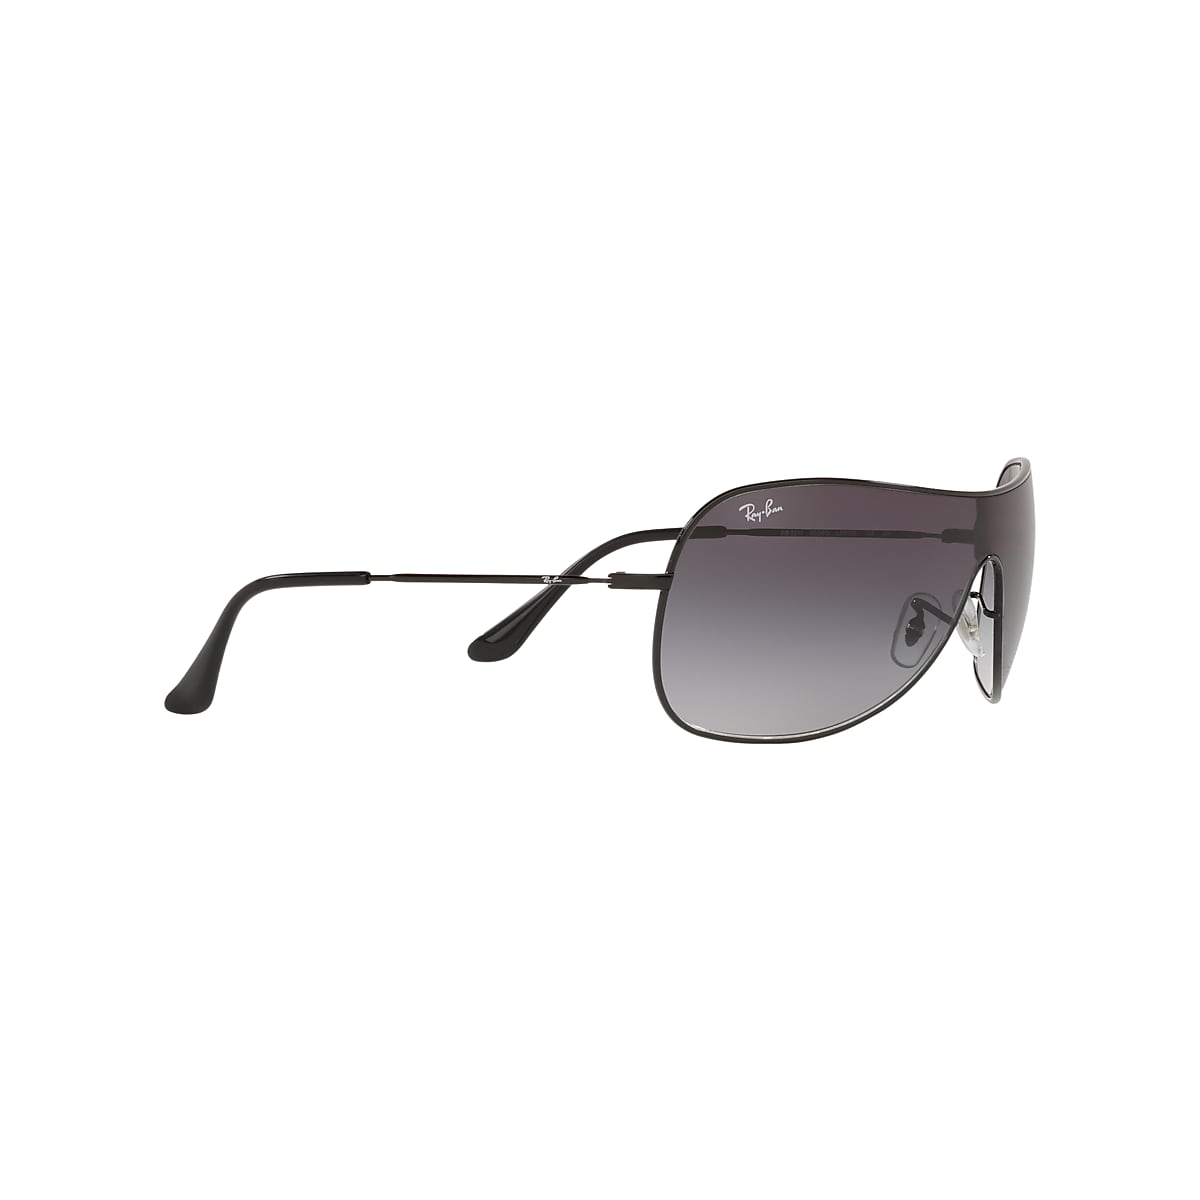 Rb3211 Sunglasses in Black and Grey | Ray-Ban®